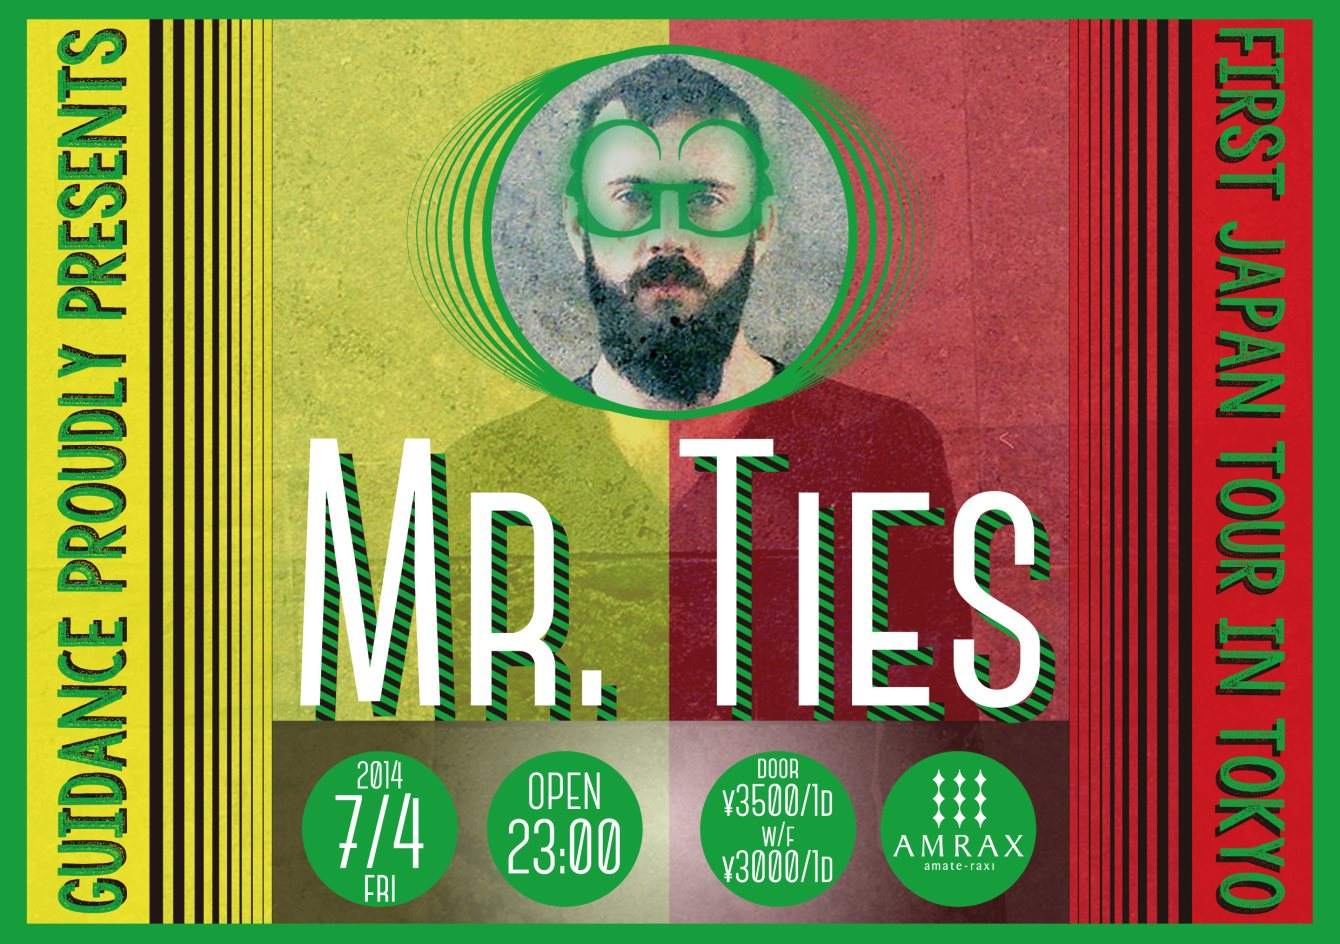 Guidance Proudly presents Mr Ties 1st Japan Tour in Tokyo - フライヤー表